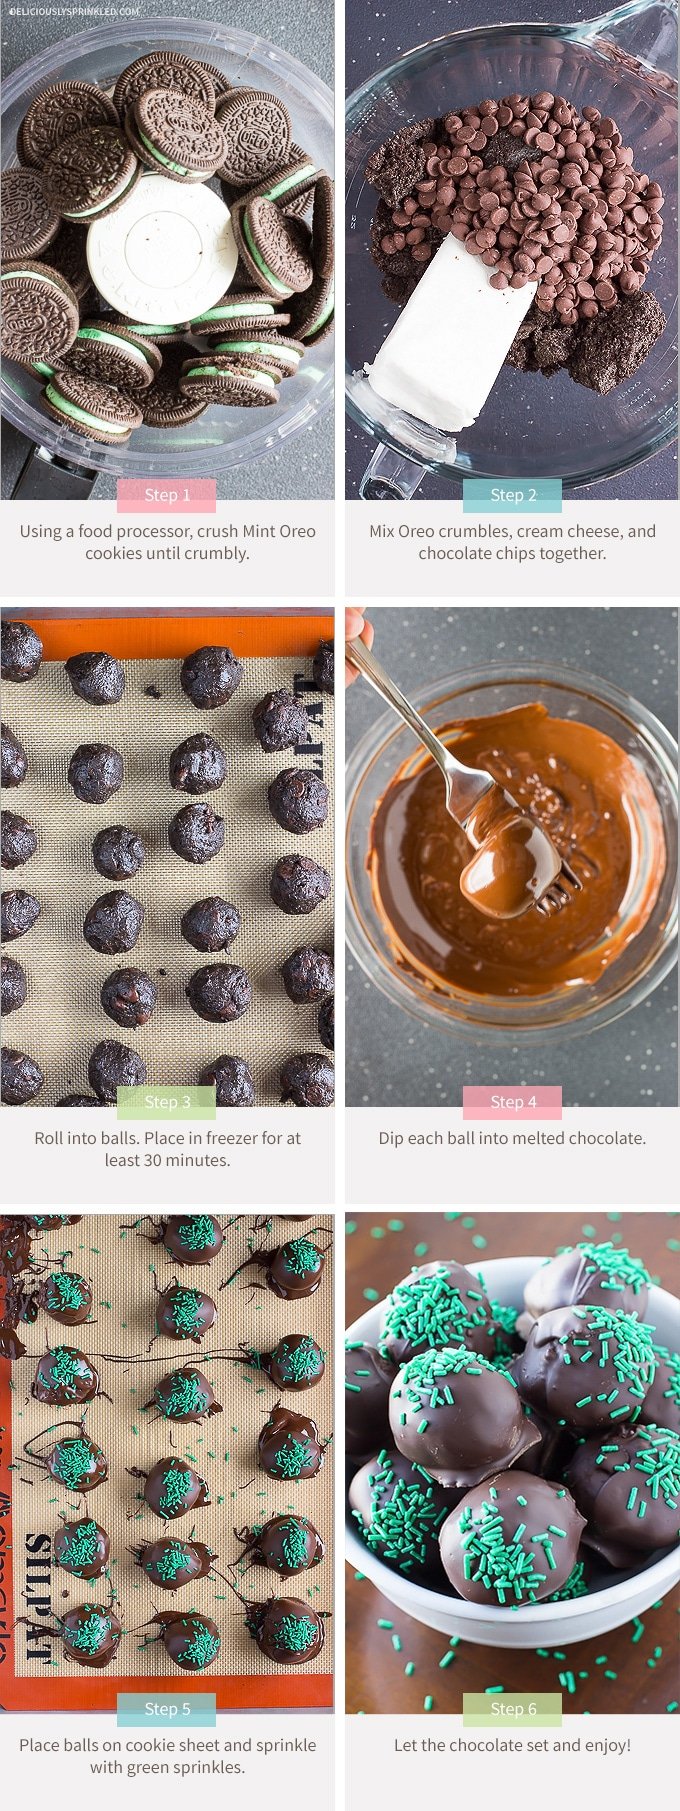 The steps for making mint oreo truffles are displayed in six separate images.